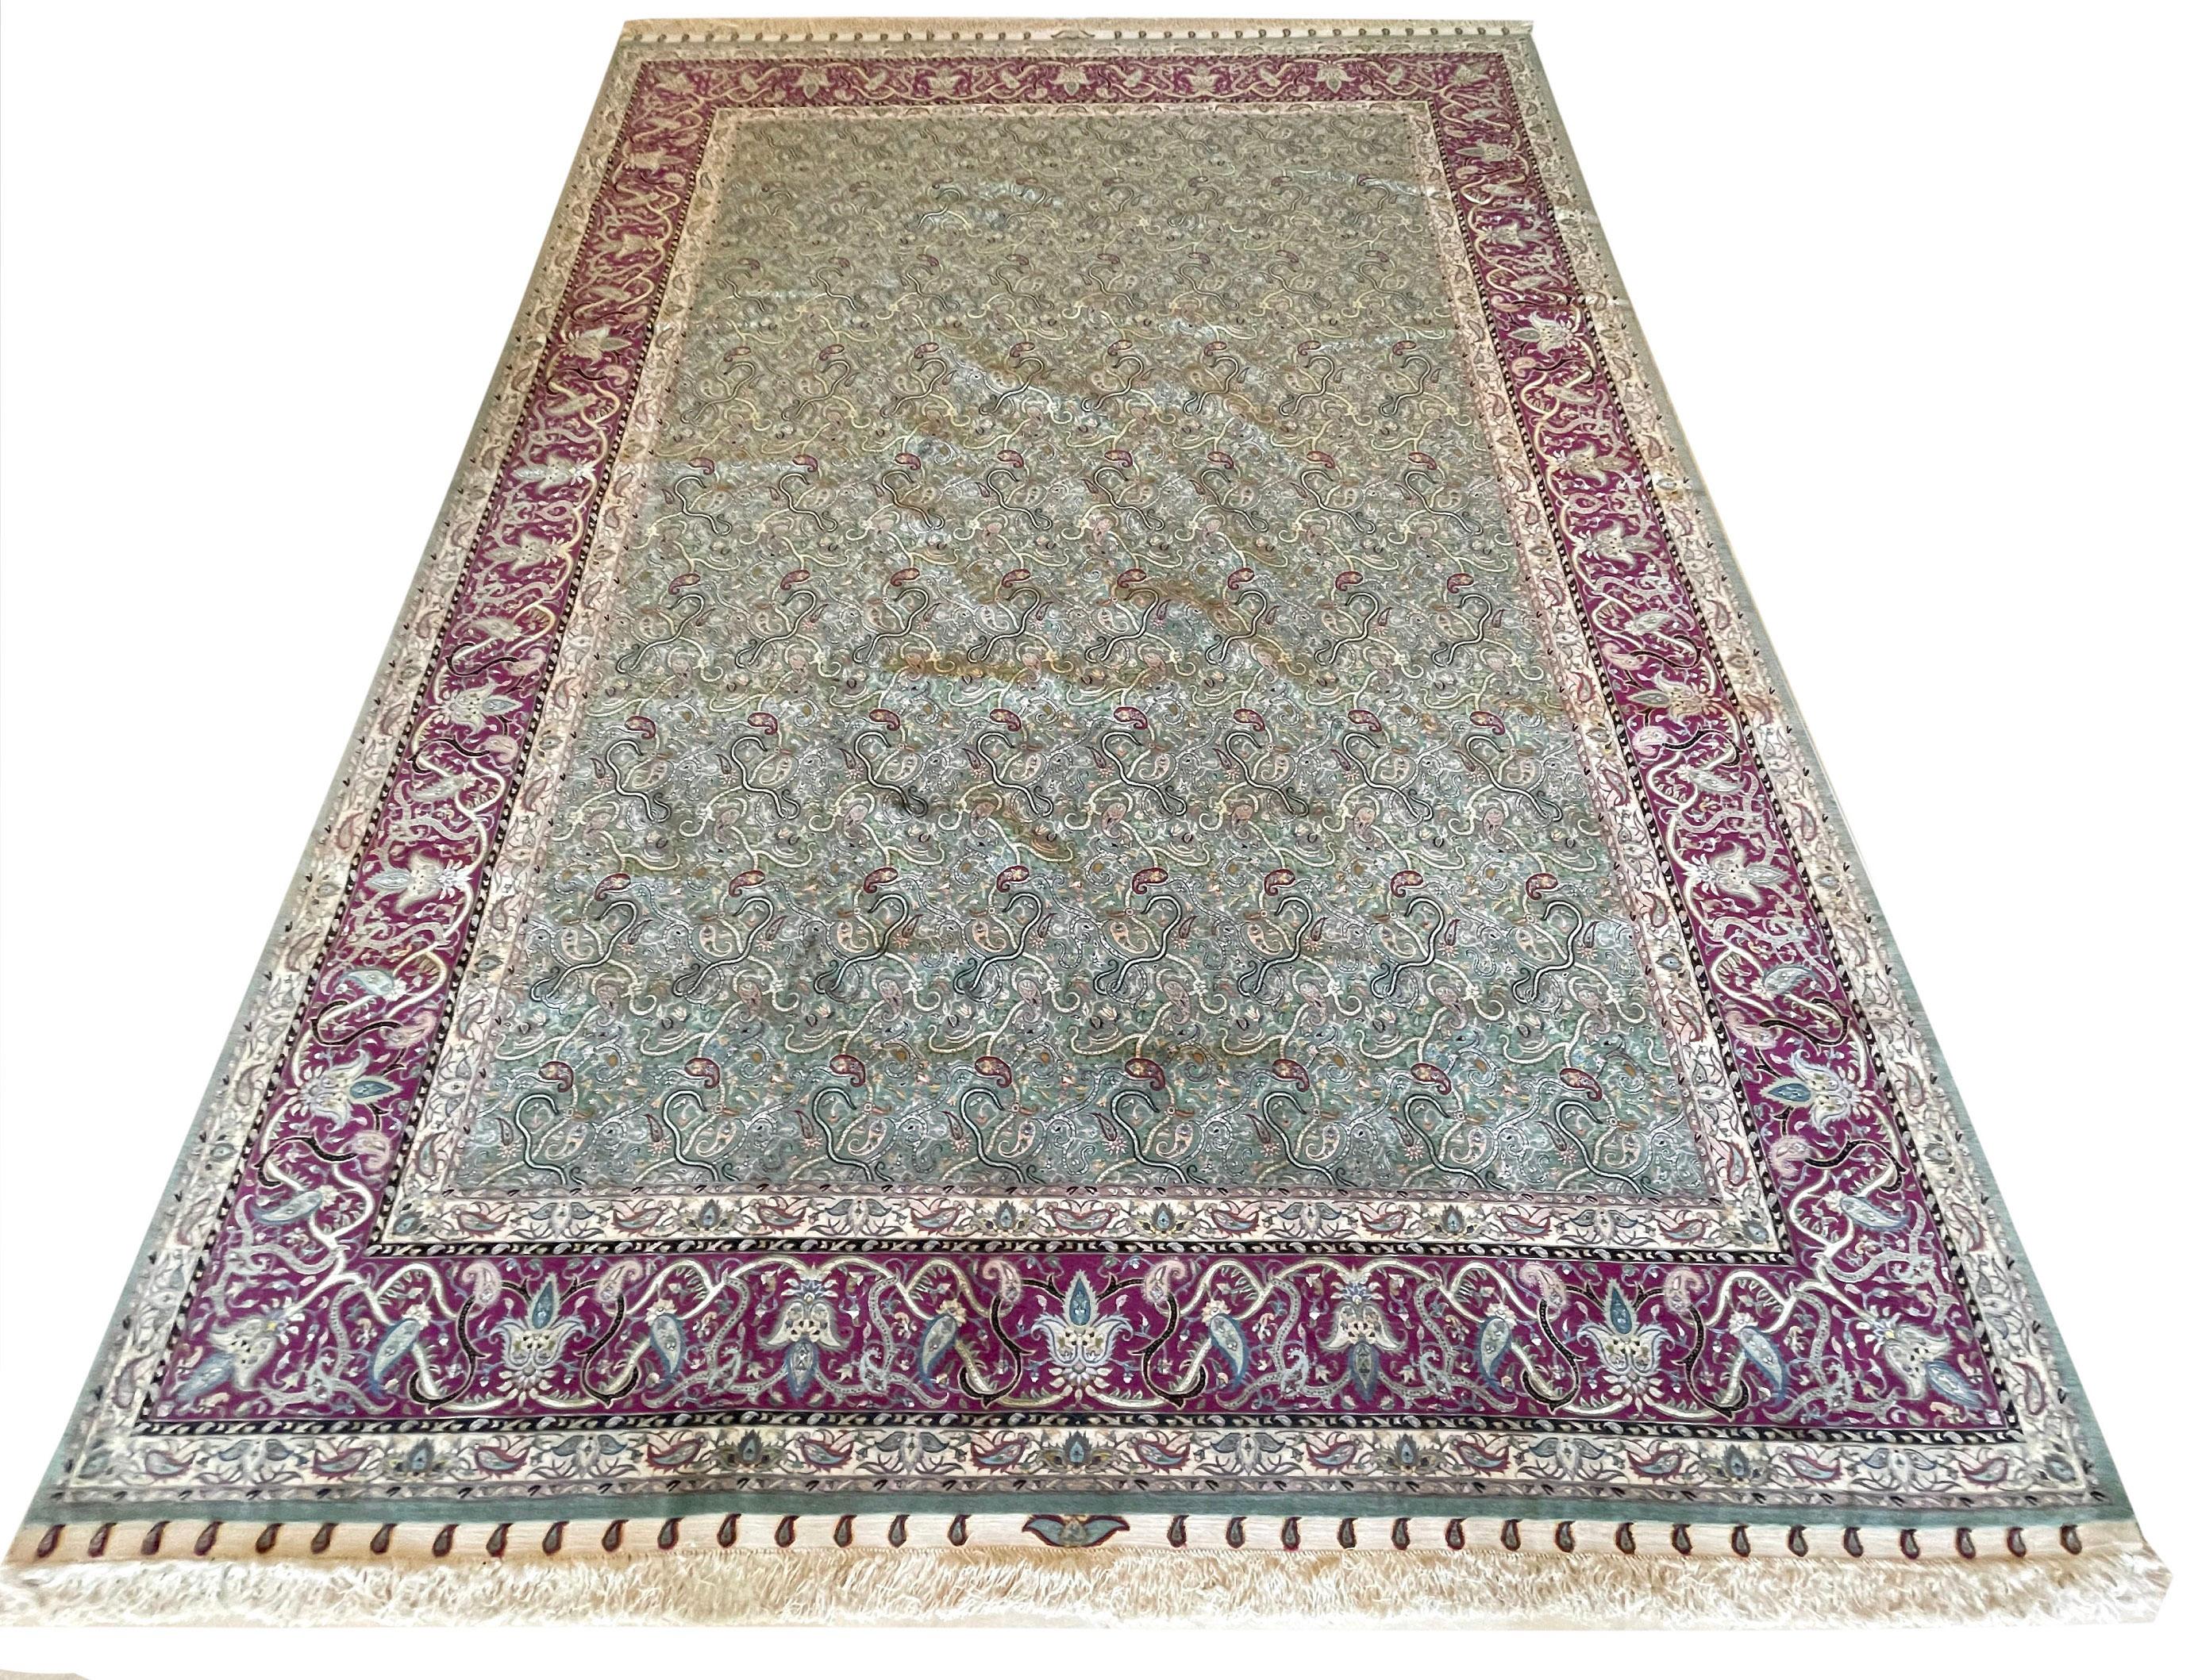 This rug is a hand-knotted master piece Persian Tabriz rug with an extremely fine quality. This rug features an allover paisley pattern and design. The pile is wool and silk on silk foundation. The size is 10 feet wide by 13 feet 4 inches tall. In